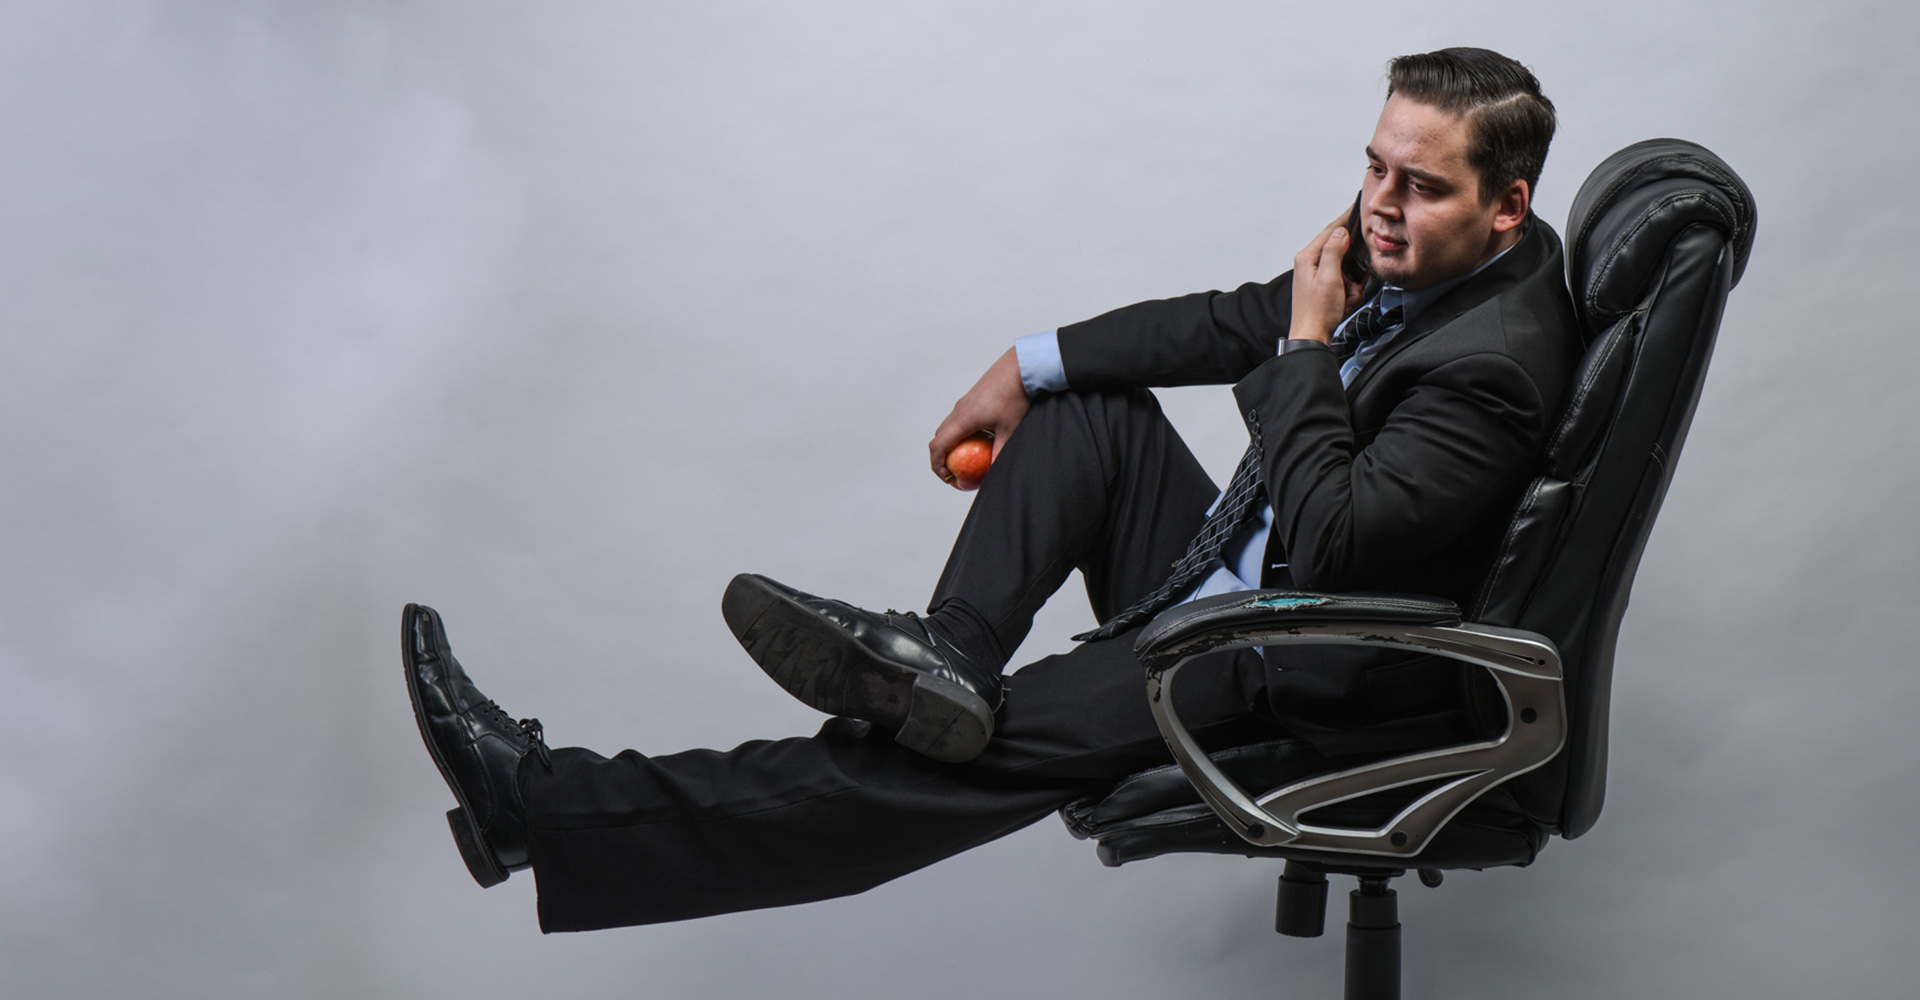 Drew Douglass wearing a suit, legs crossed in a computer chair purchased at a club store, holding a phone up to his ear in one hand, and an apple in the other hand. Also - his legs are resting on an invisible box.